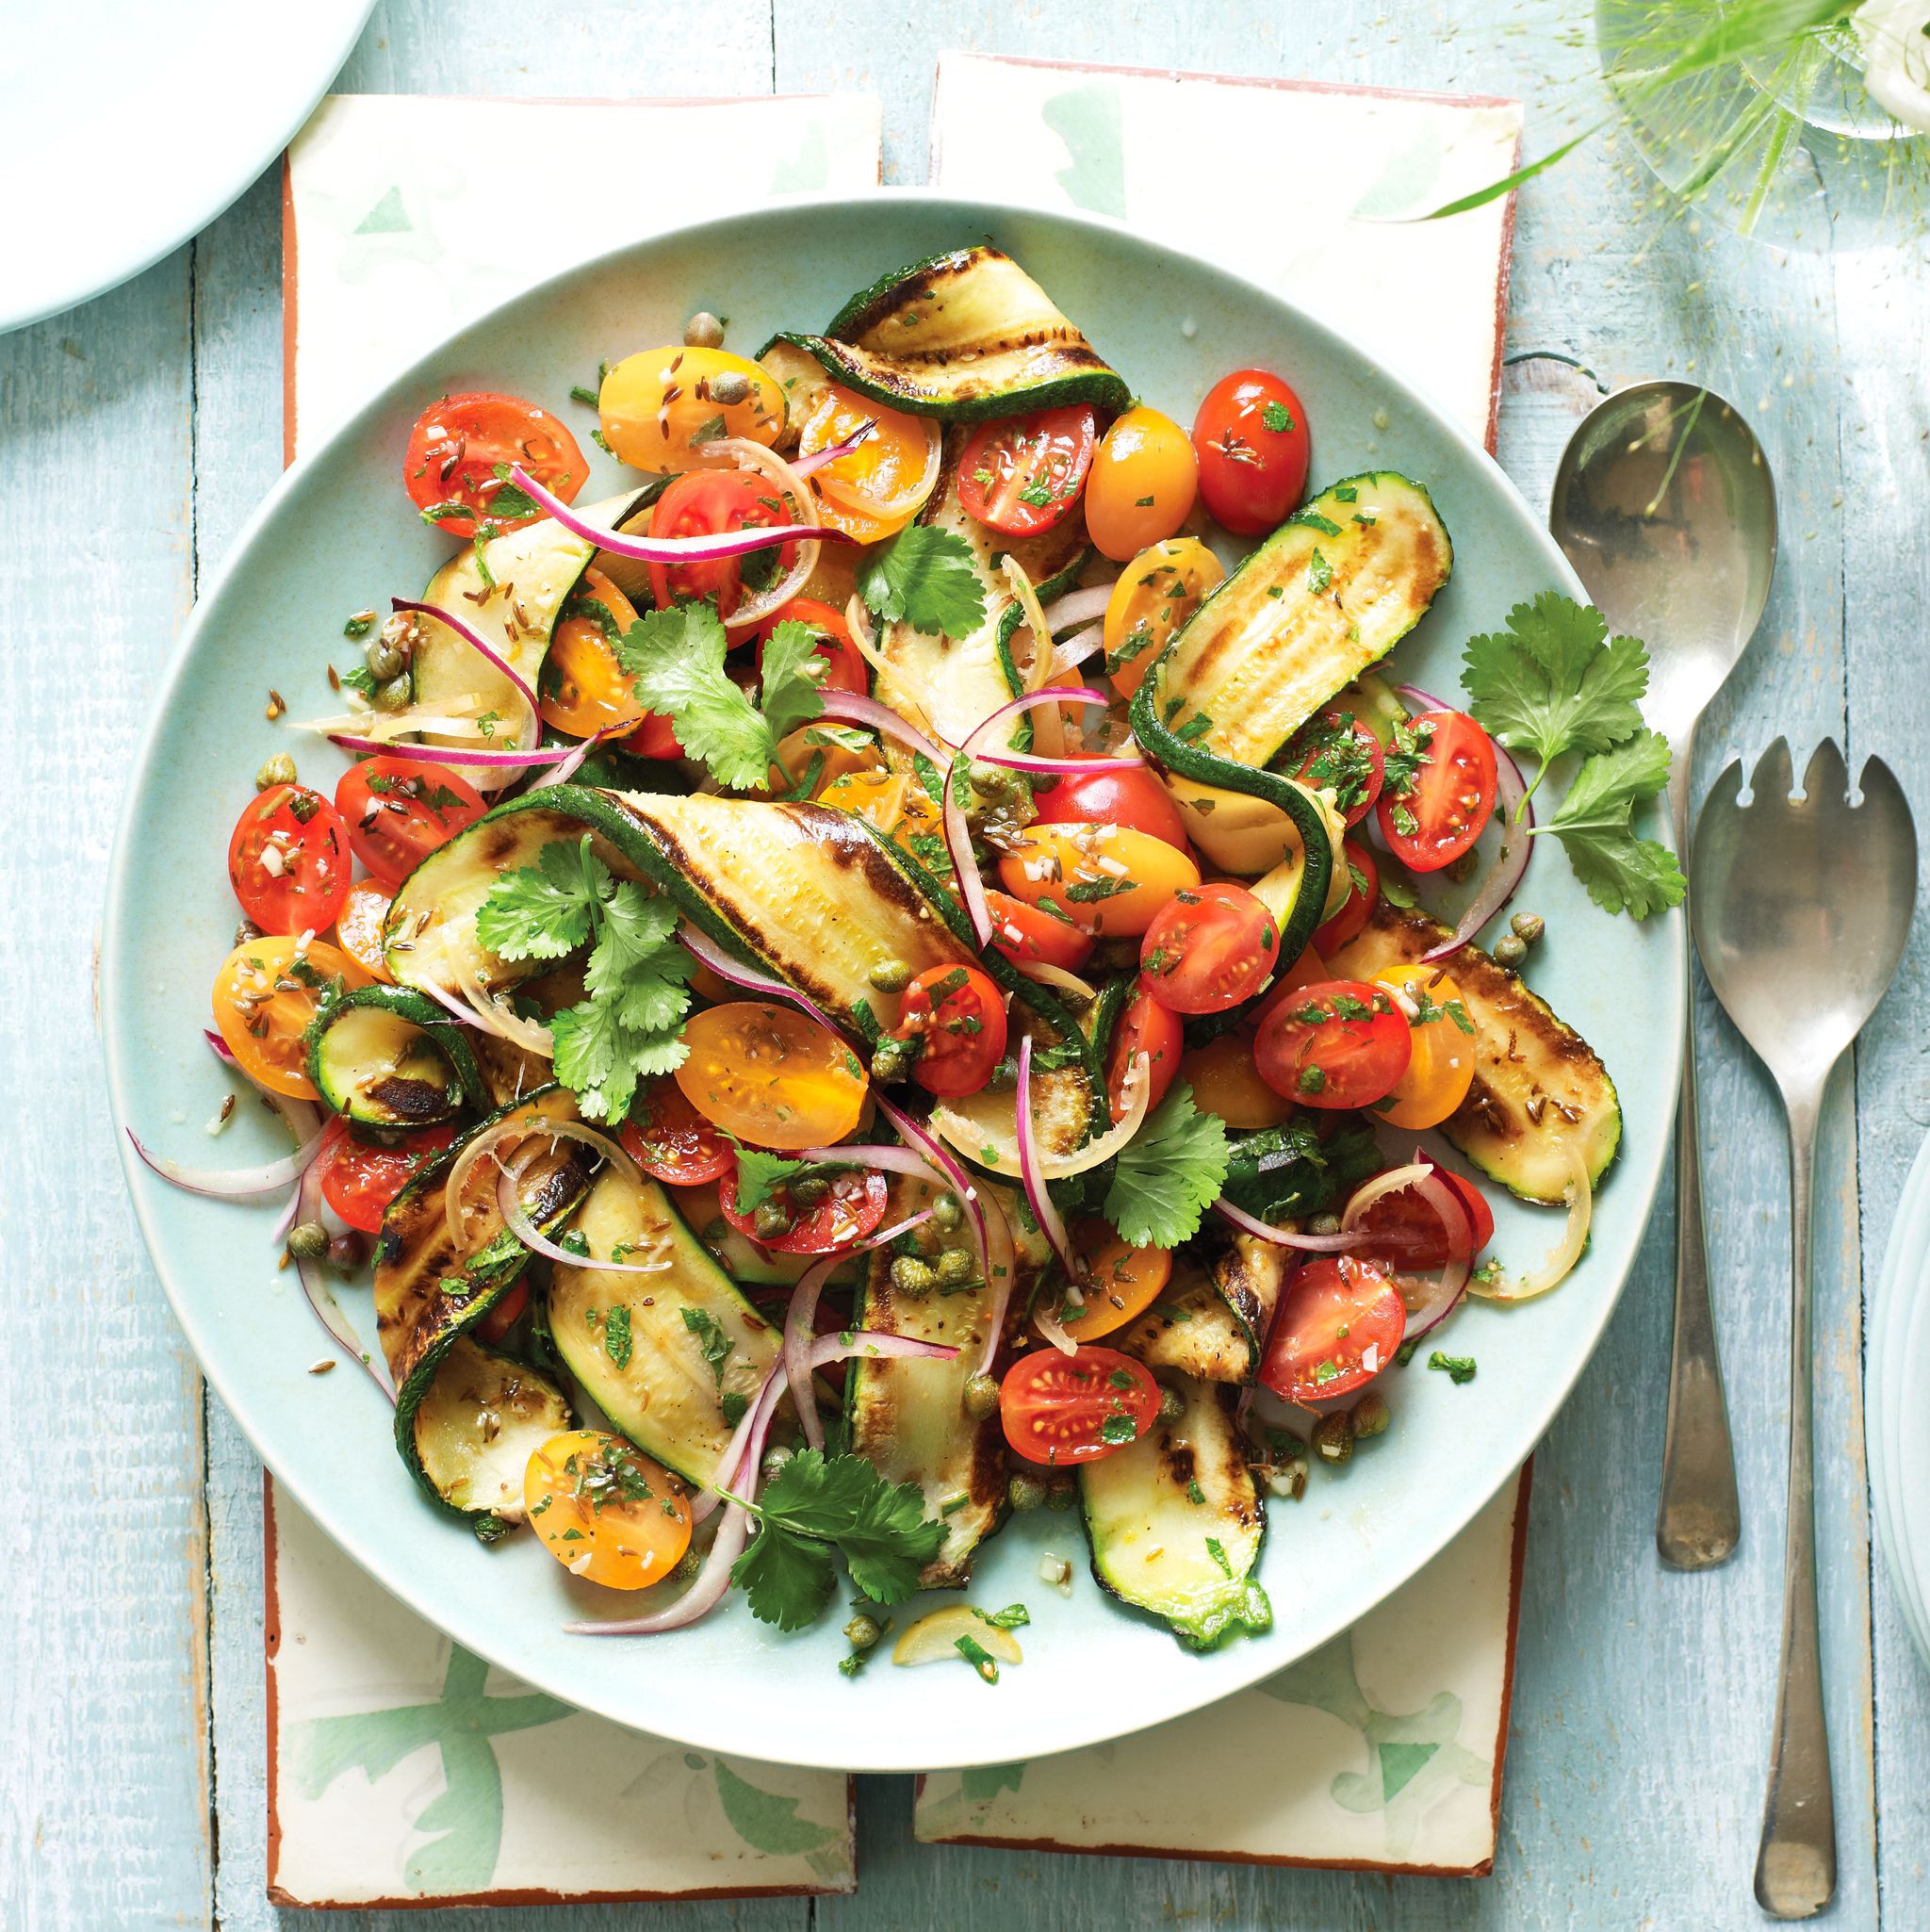 griddled courgette ribbons in a salad with tomatoes, red onion, lemon and herbs